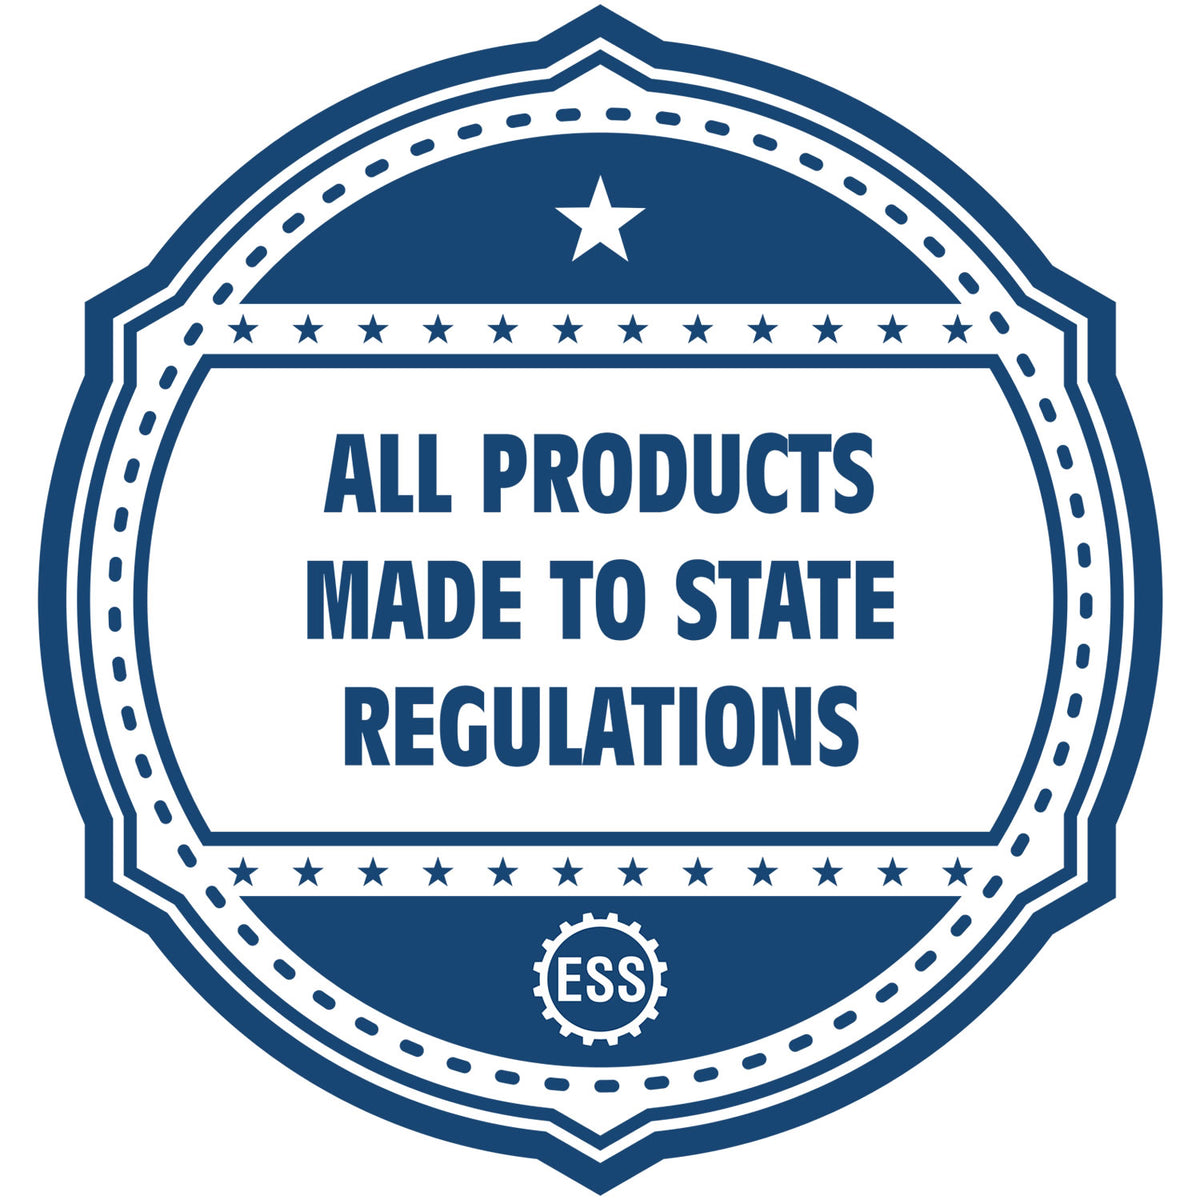 An icon or badge element for the State of Wyoming Extended Long Reach Engineer Seal showing that this product is made in compliance with state regulations.